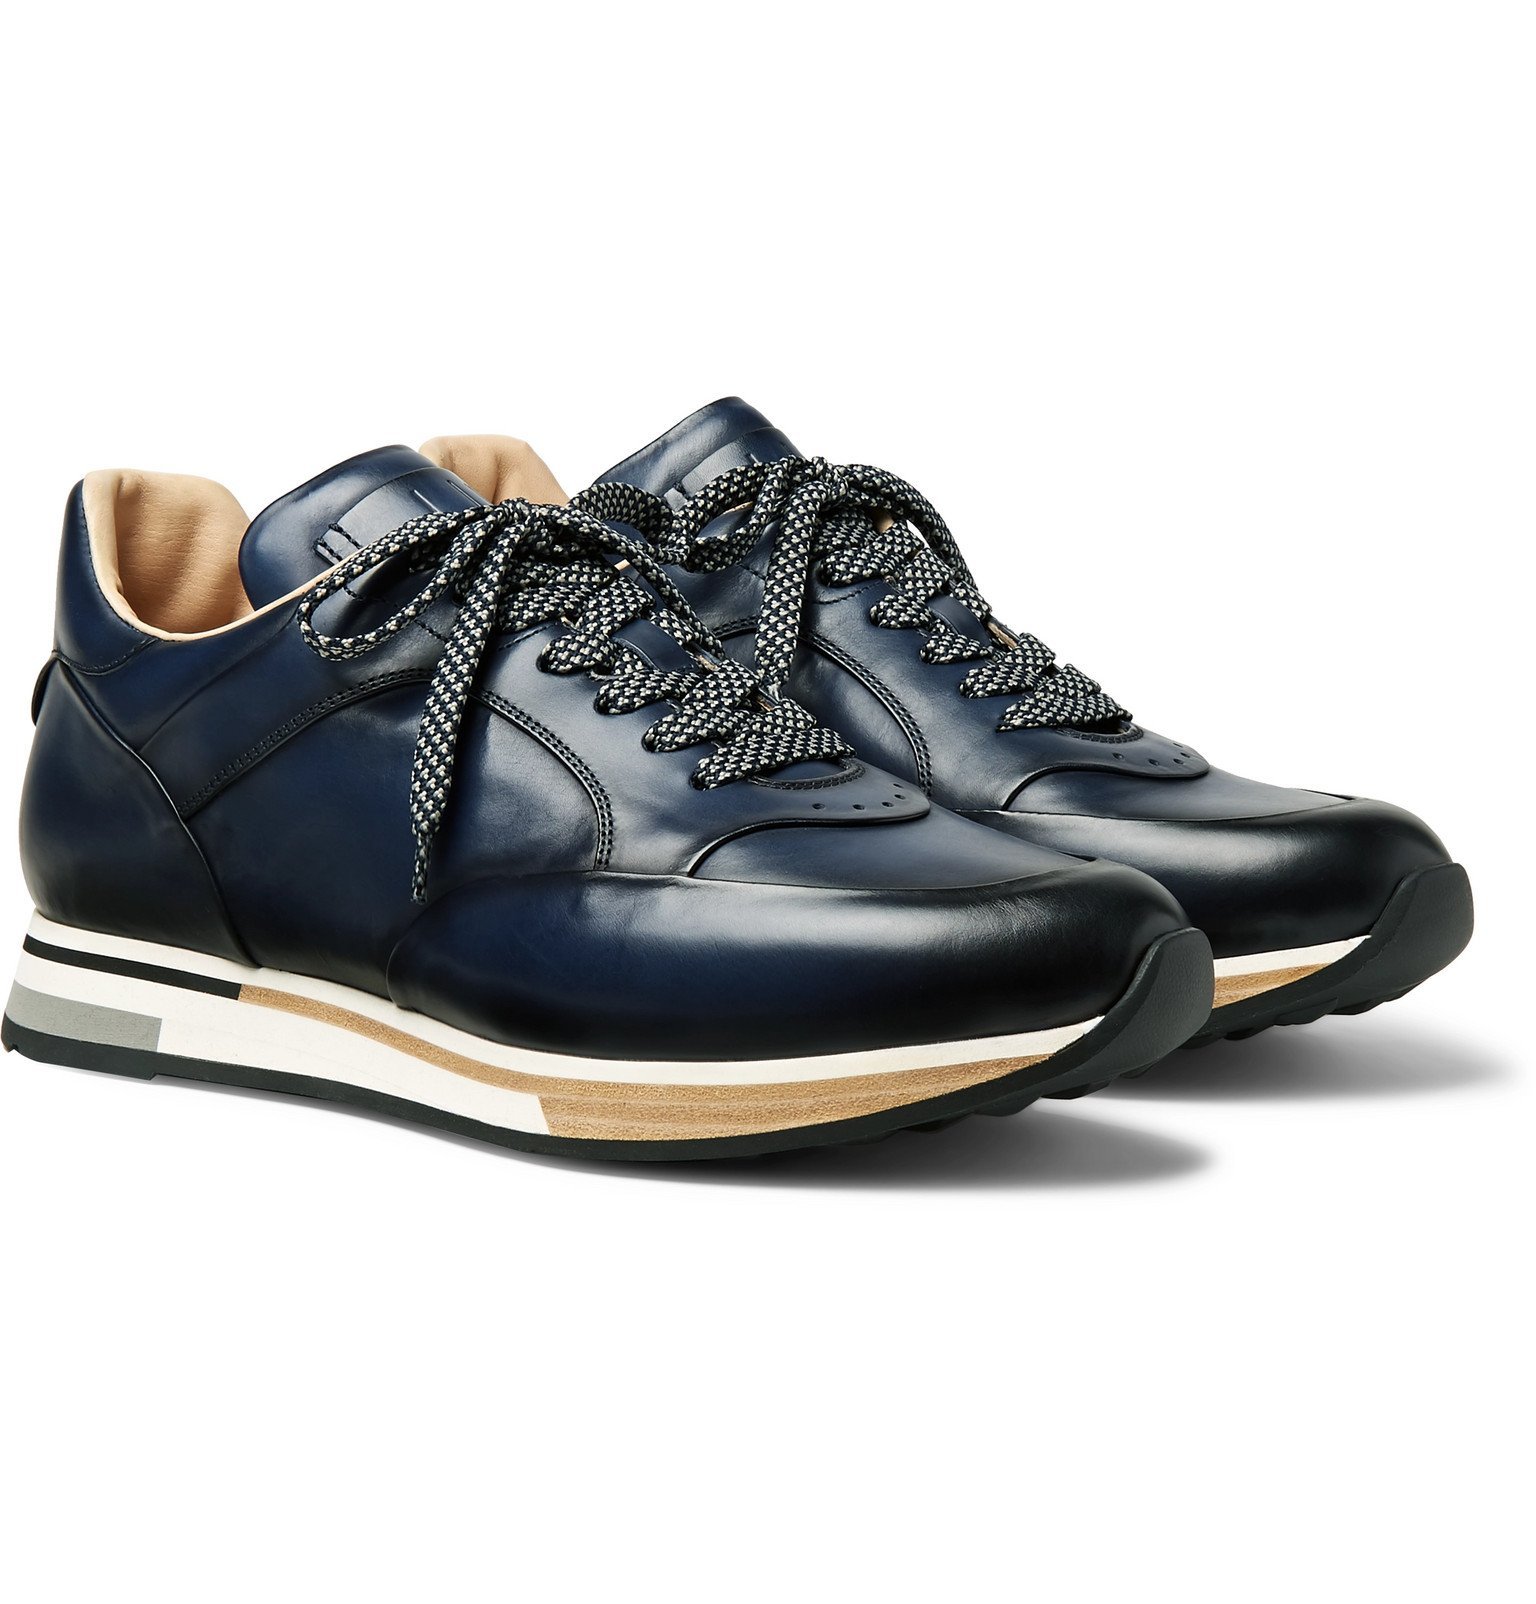 Dunhill - Duke Leather Sneakers - Blue Dunhill